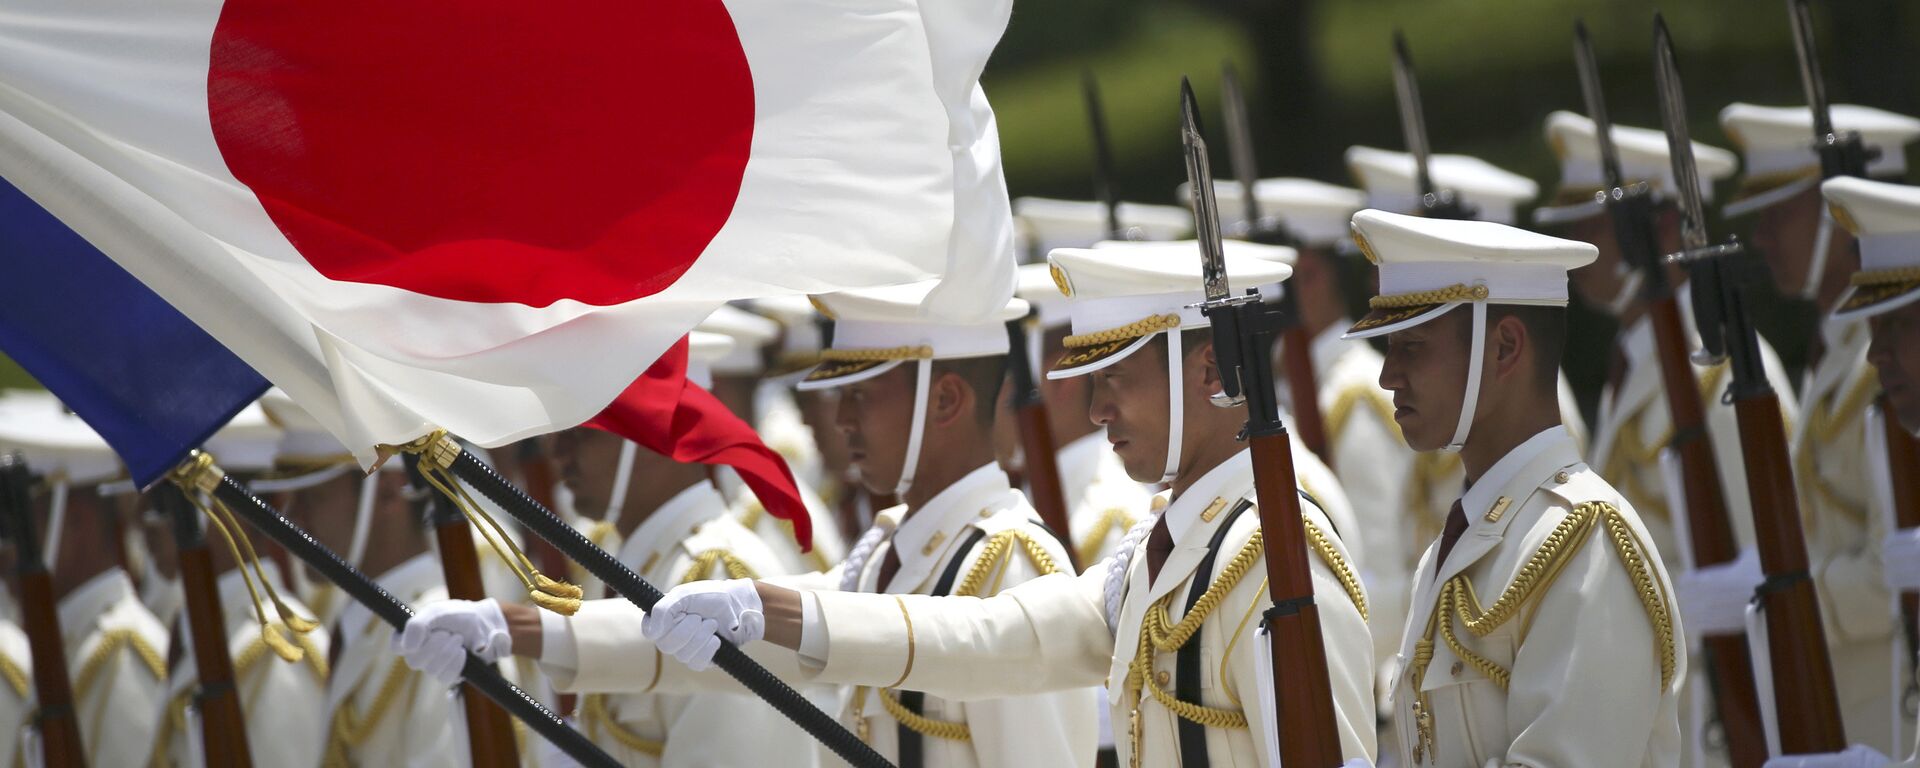 In this July 29, 2014 photo, members of a Japan Self-Defense Forces' honor guard prepare to be inspected by French Defense Minister Jean-Yves Le Drian at the Defense Ministry in Tokyo, Tuesday, July 29, 2014 - Sputnik International, 1920, 20.02.2020